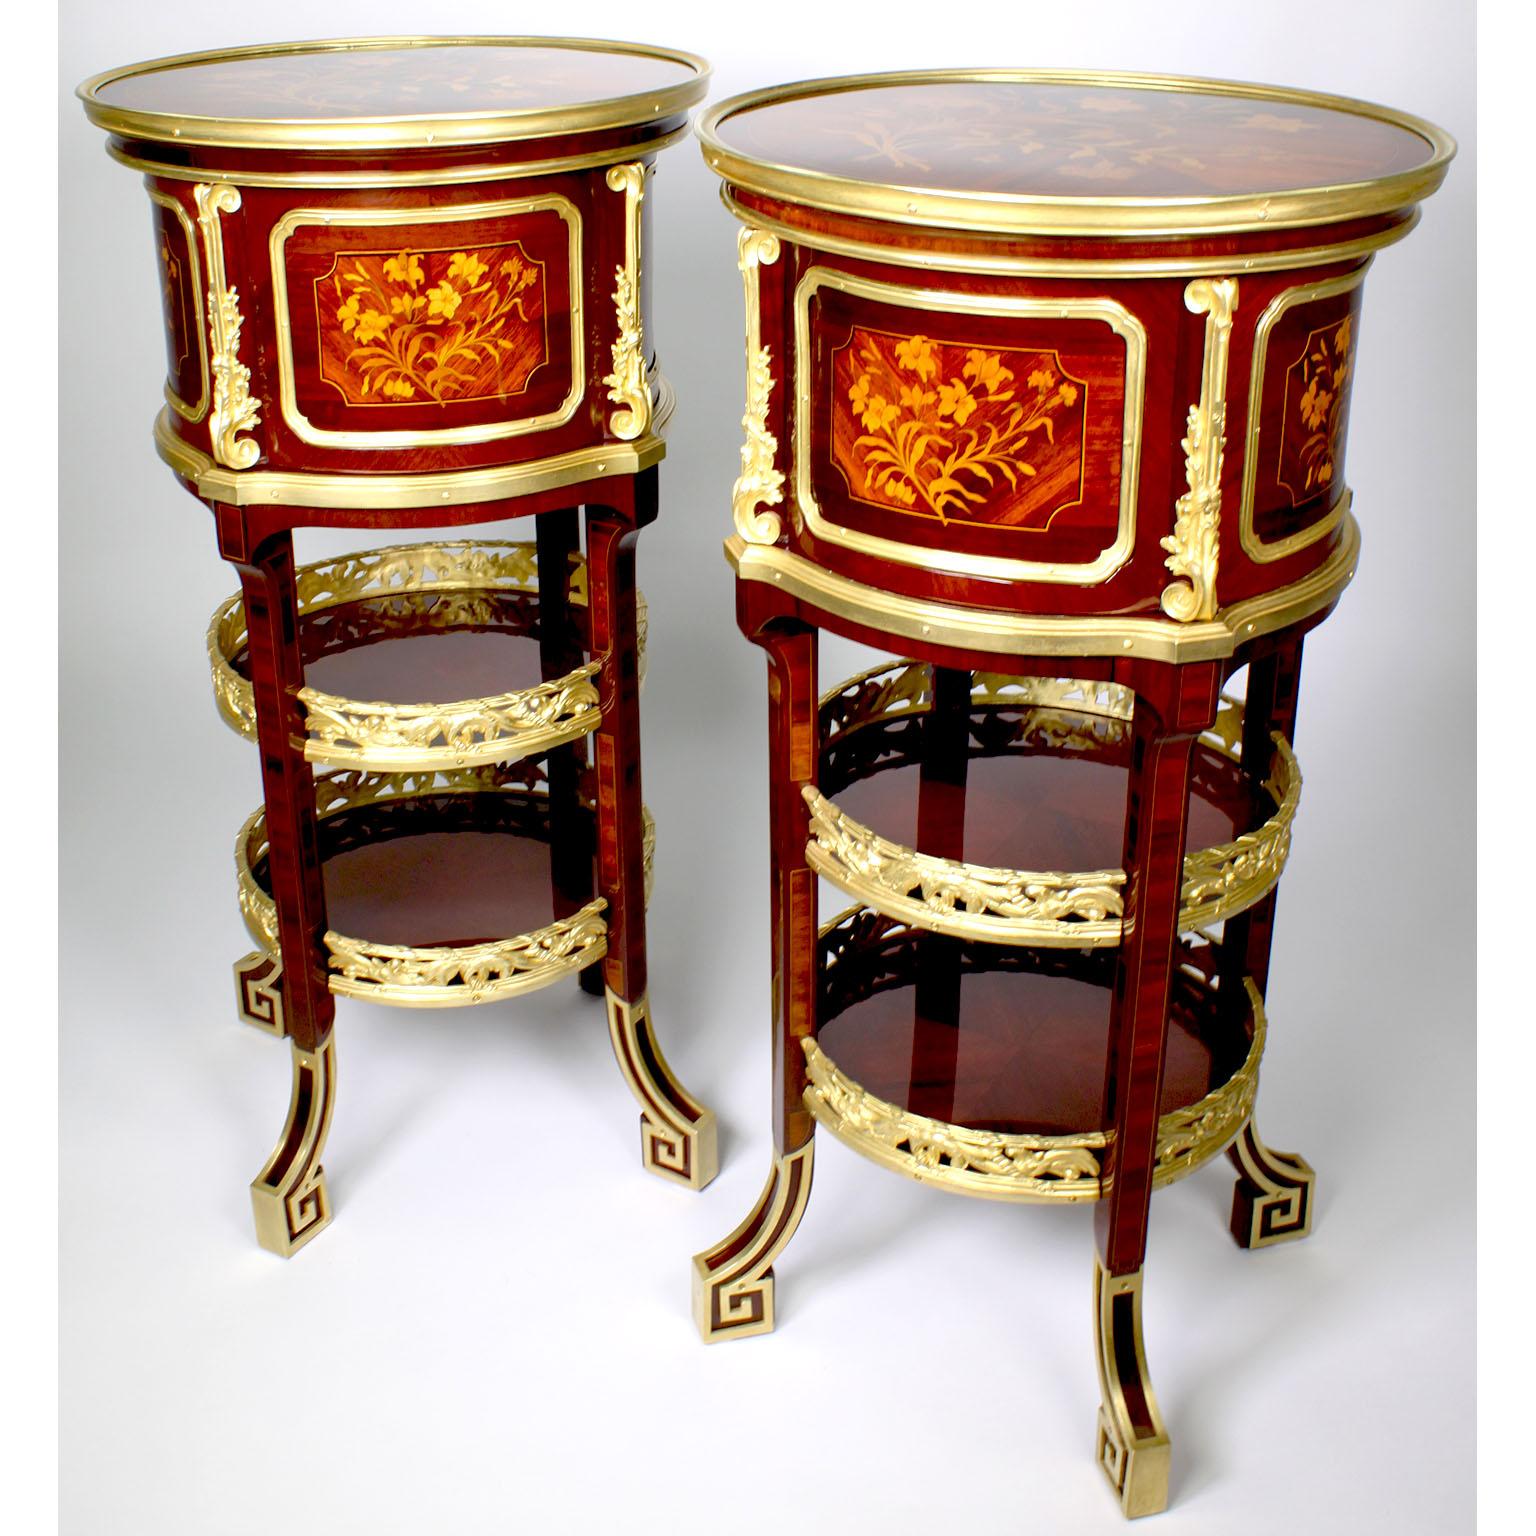 A Fine Pair of French 19th-20th Century Louis XV Style Ormolu Mounted Mahogany and Stained Fruitwood Marquetry Circular End or Side Tables en Chiffoniere, Joseph Emmanuel Zwiener - Jansen Successeur. Each table with a circular top inlaid with a